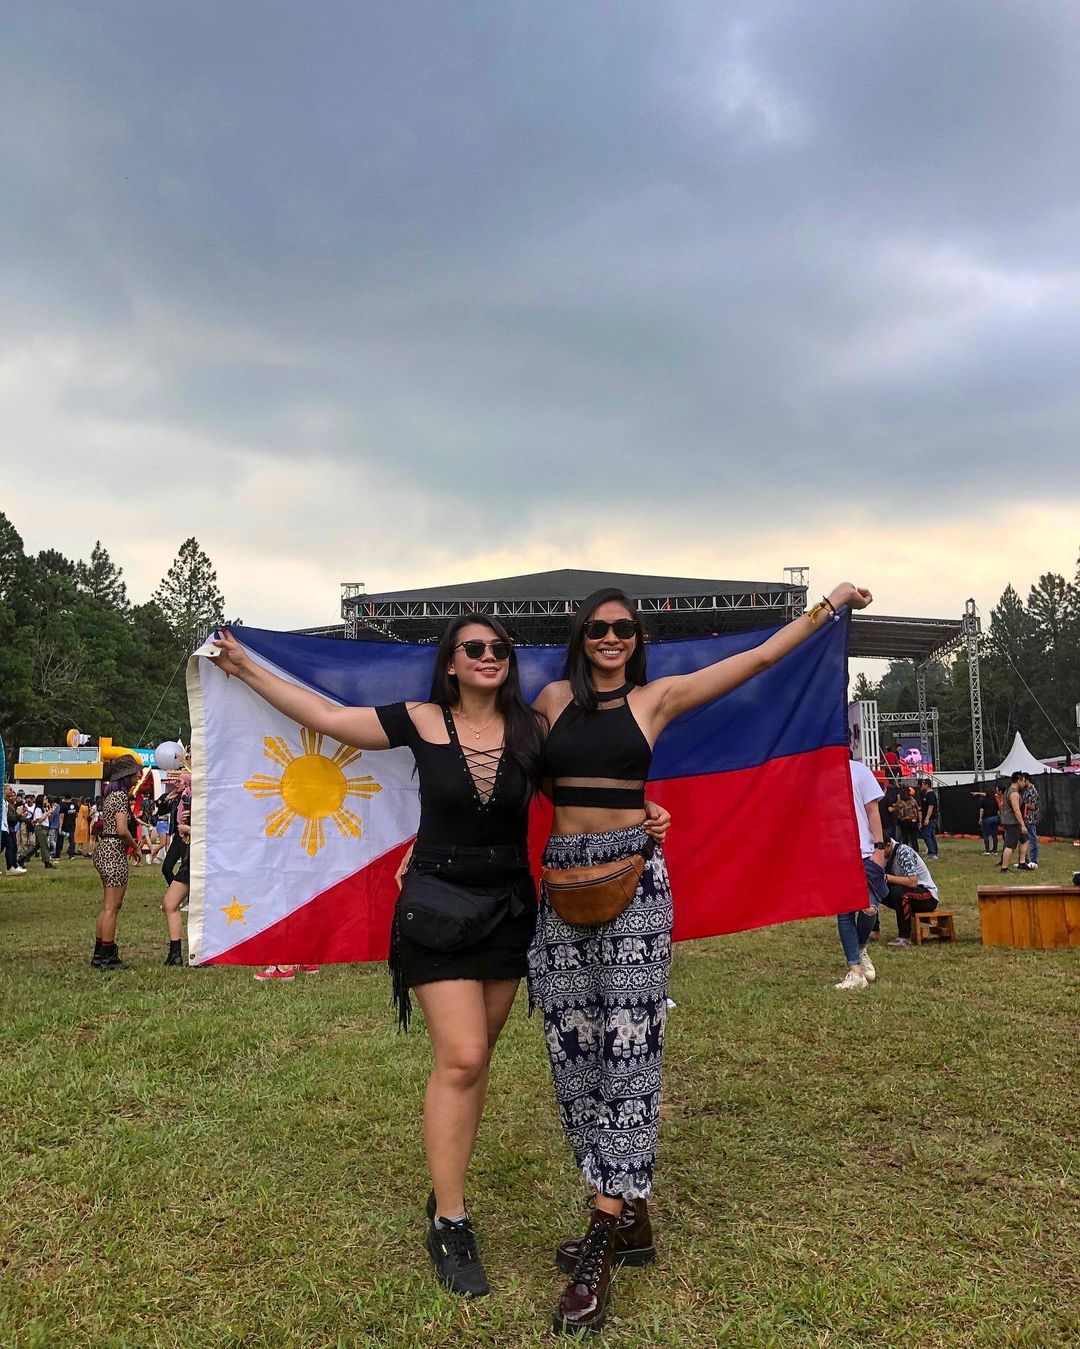 Miss Universe Philippines 2021 Beatrice Luigi Gomez and girlfriend Kate Jagdon at a music festival in Malaysia